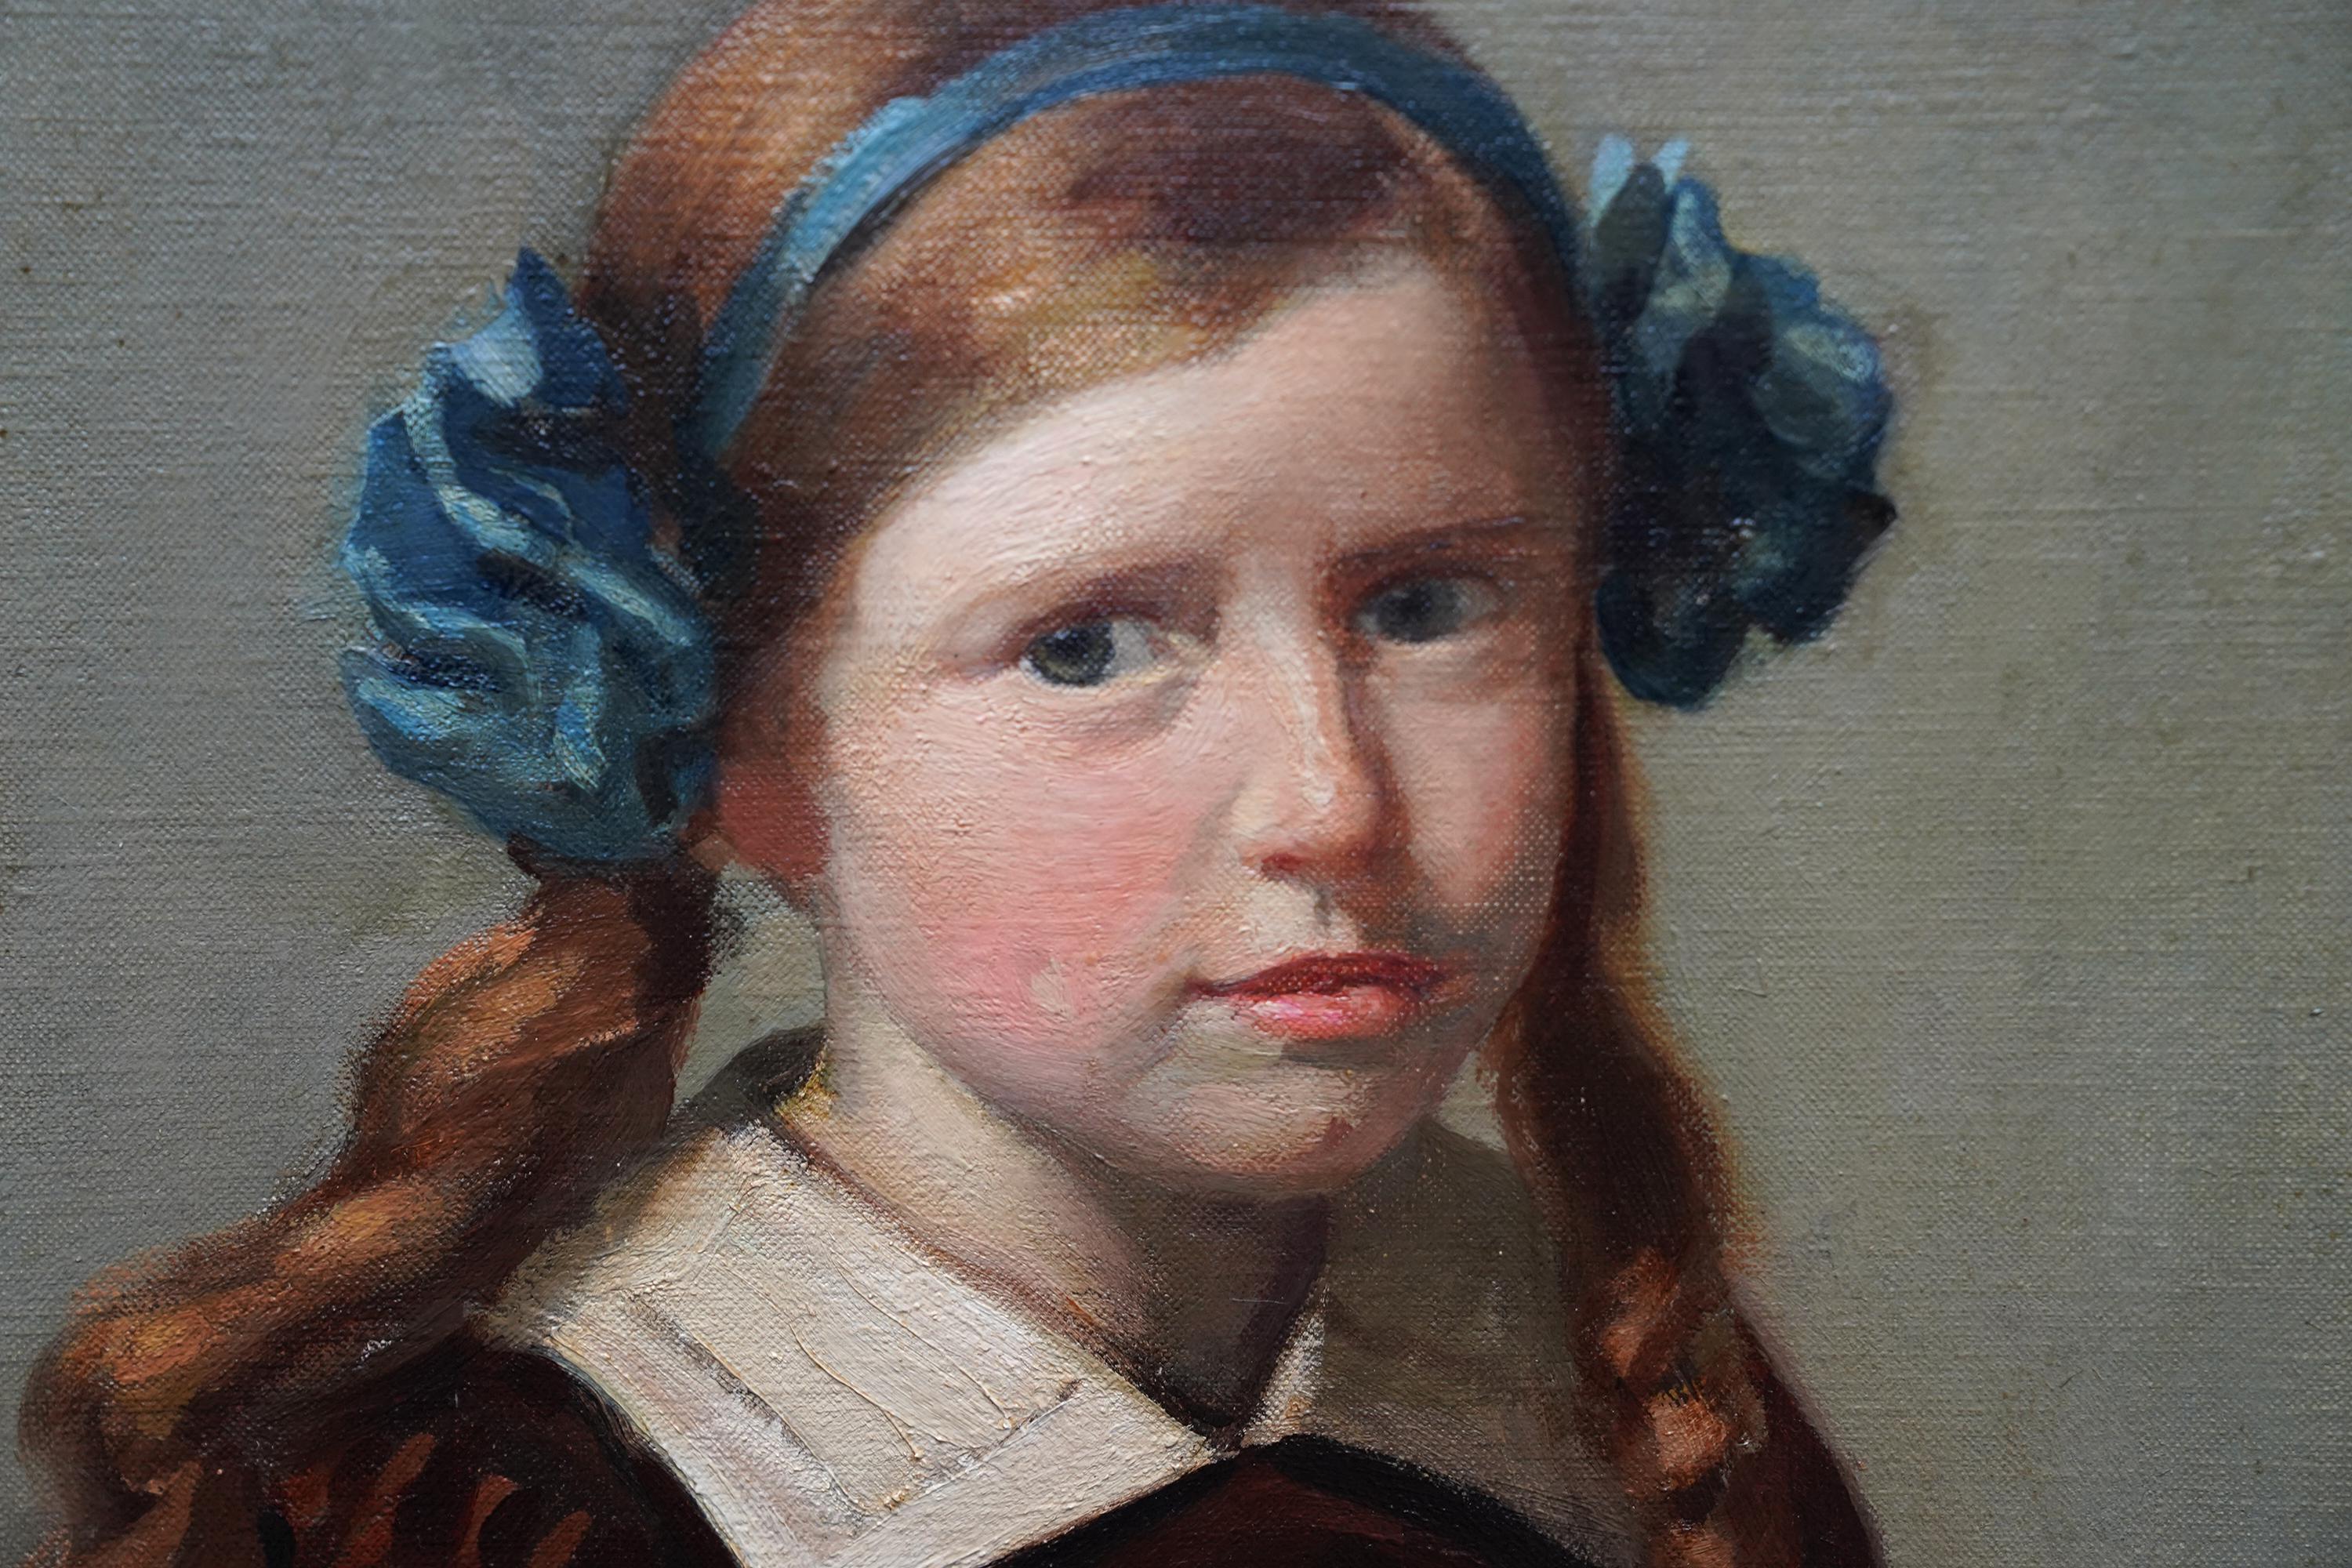 This lovely portrait oil painting is by Scottish exhibited artist Allan Newton Sutherland. It was painted in 1914 and is a seated portrait of a young Scottish girl with auburn hair and a blue hair band with flowers. A very sweet painting and a